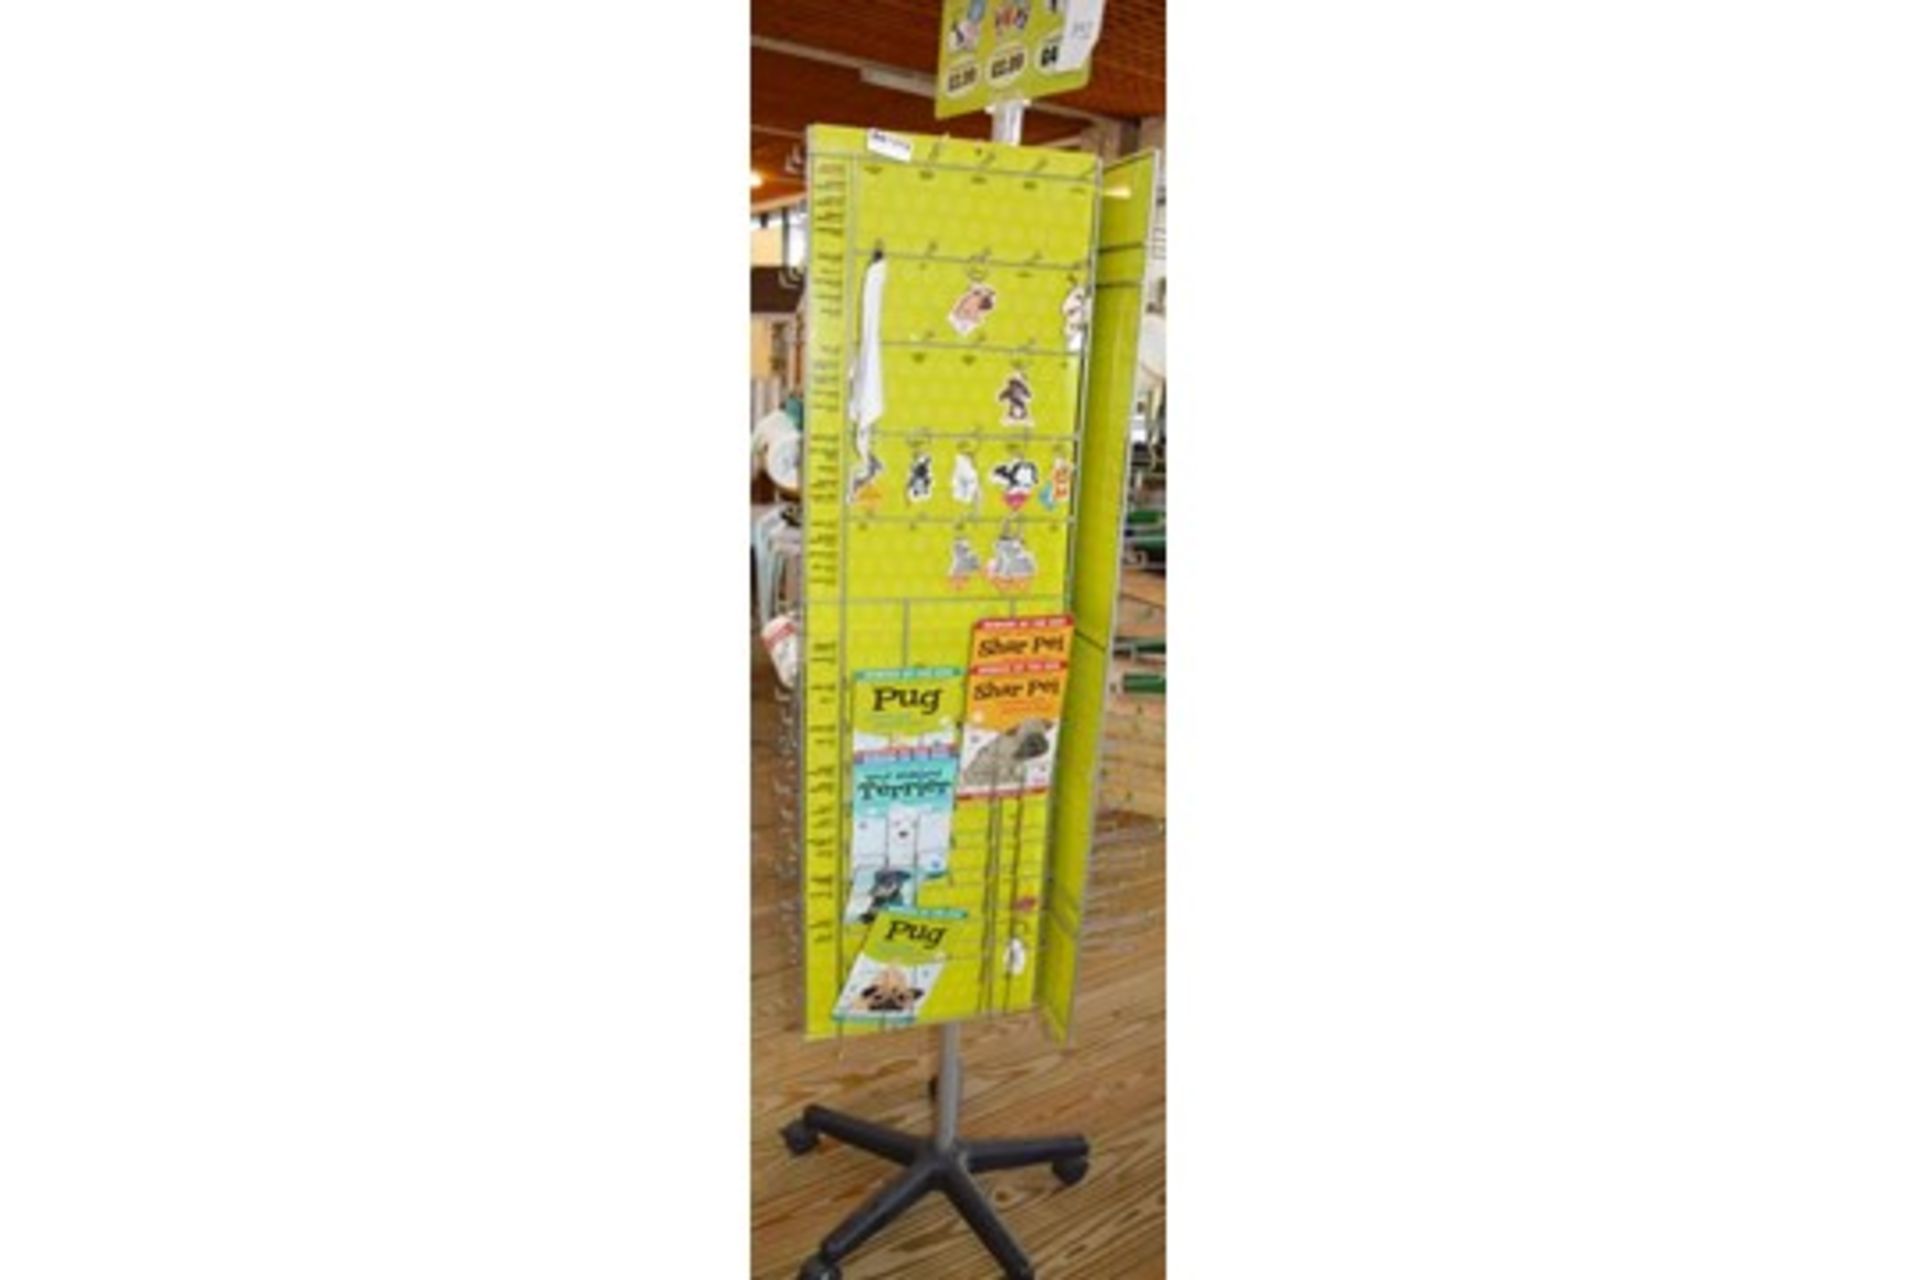 27 x Retail Carousel Display Stands With Approximately 2,800 Items of Resale Stock - Includes - Image 43 of 61